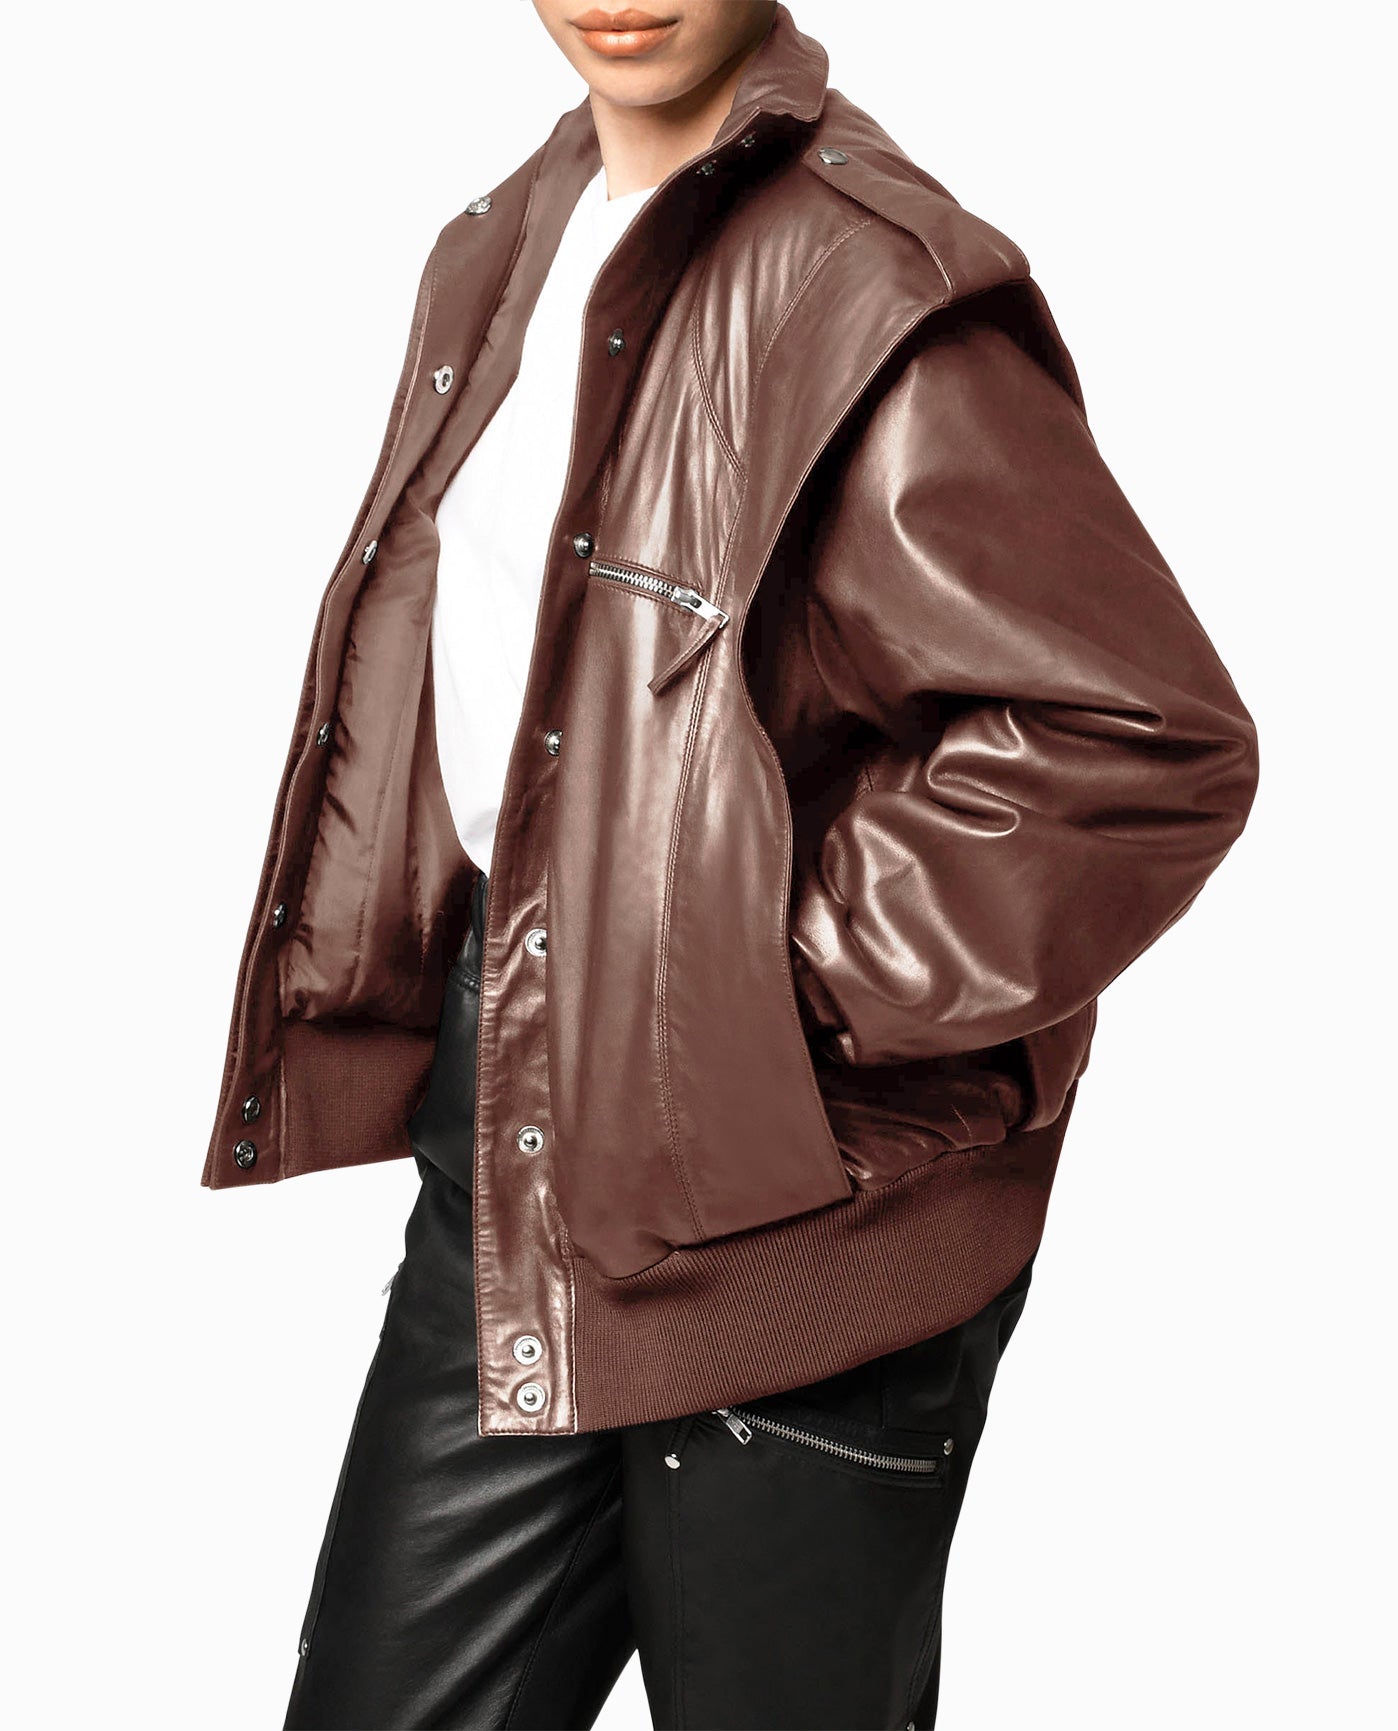 LEATHER SPACE JACKET WITH HANDS IN POCKETS | BROWN